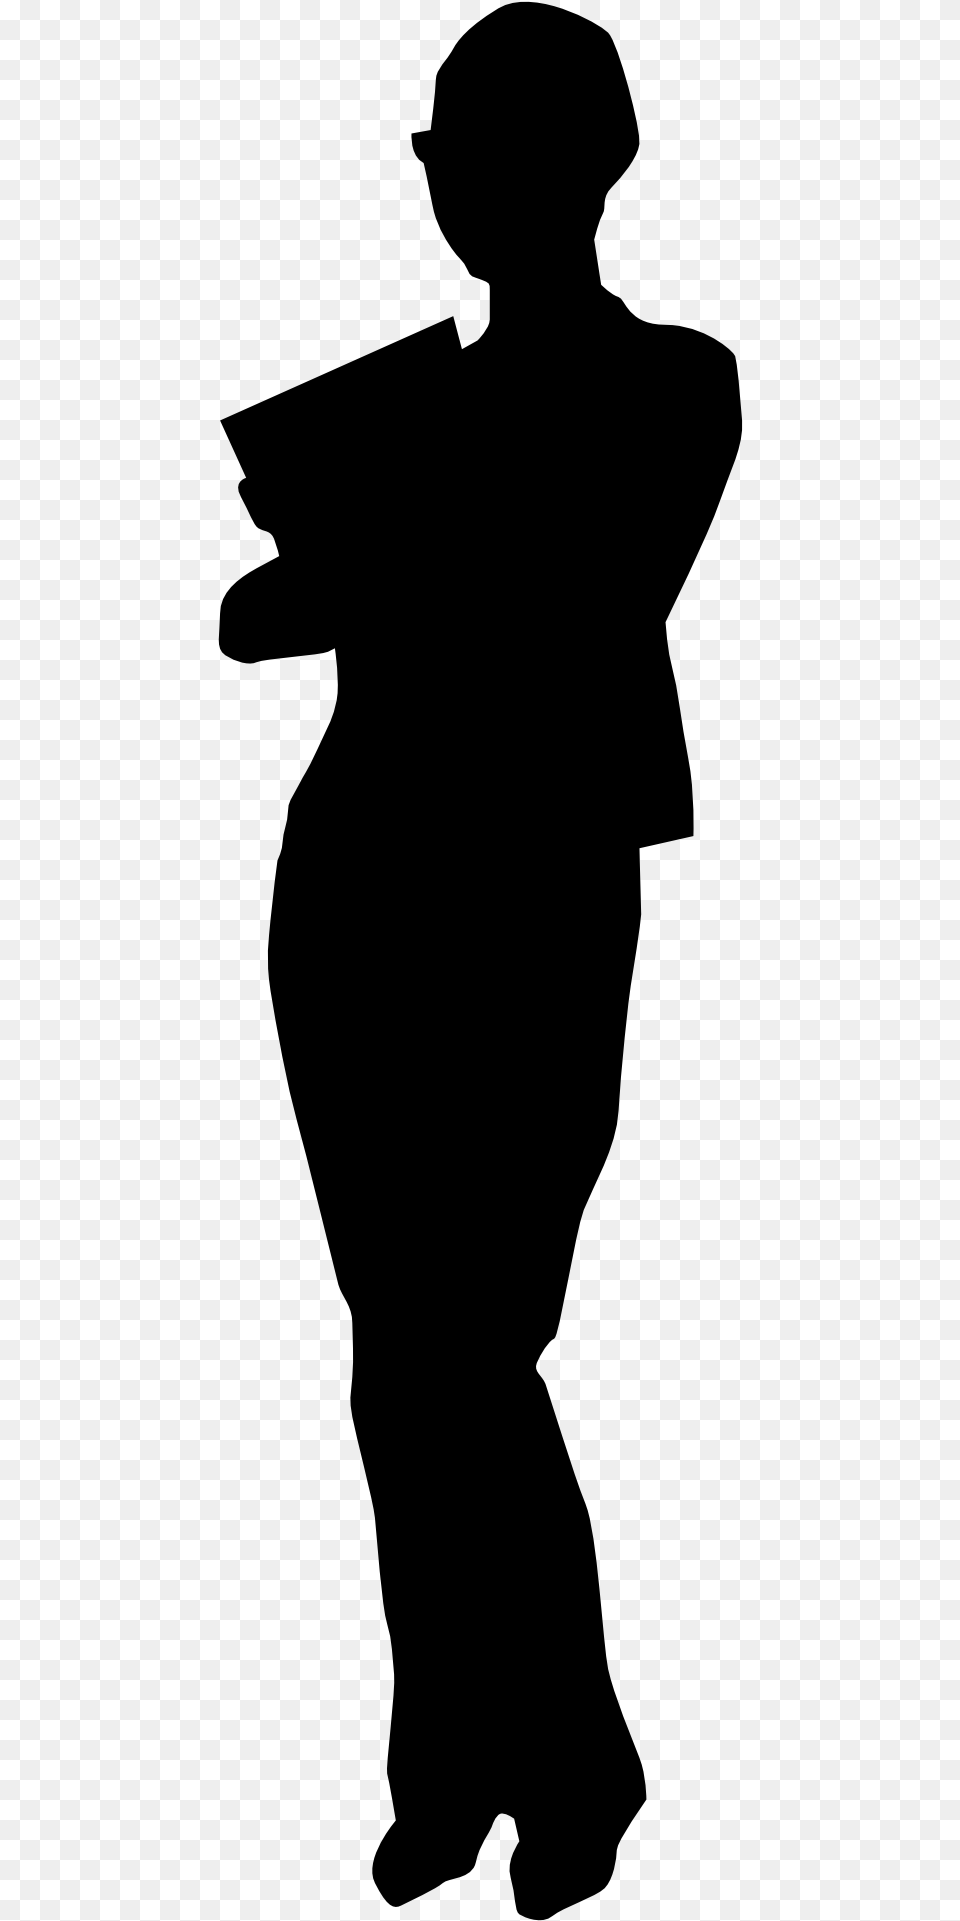 Silhouette Clip Art Man Facing Forward Silhouette, Gray Free Transparent Png